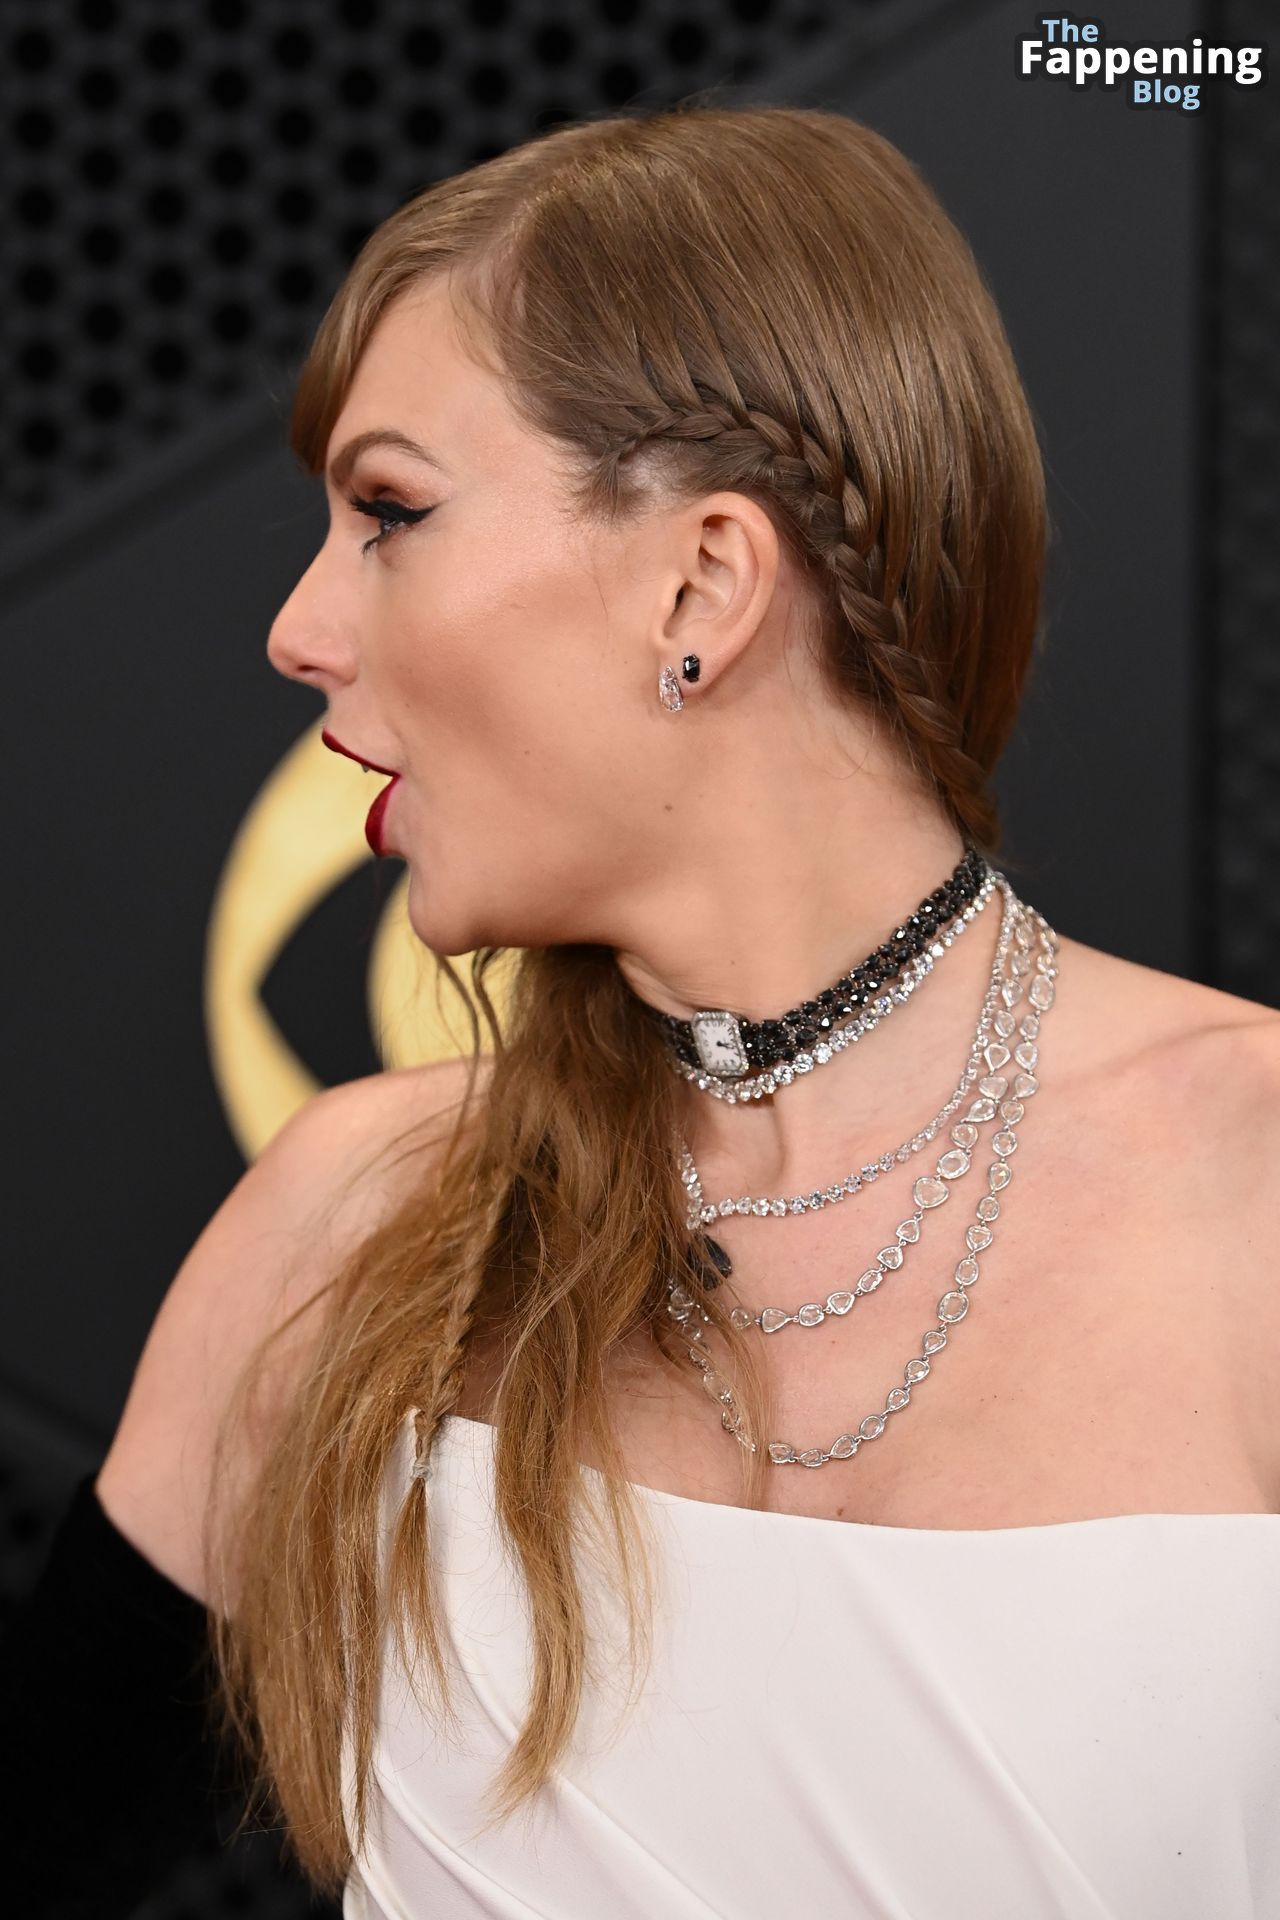 Taylor Swift Wows in White Arriving at the 66th Annual Grammy Awards (150 Photos)